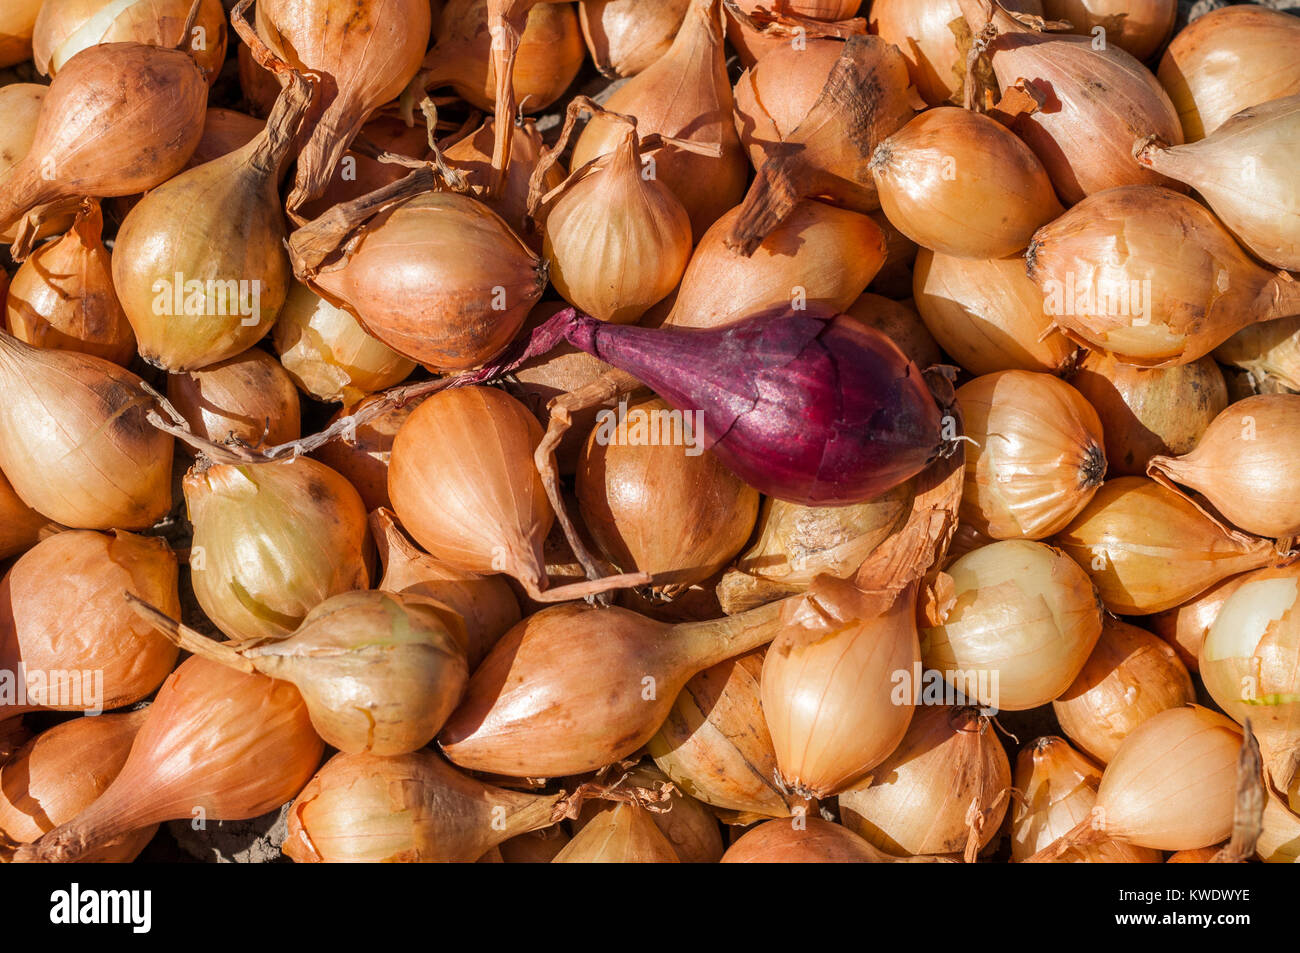 Full frame closeup of a pile of yellow onion seedlings and one single red onion that stands out from the rest. Stock Photo